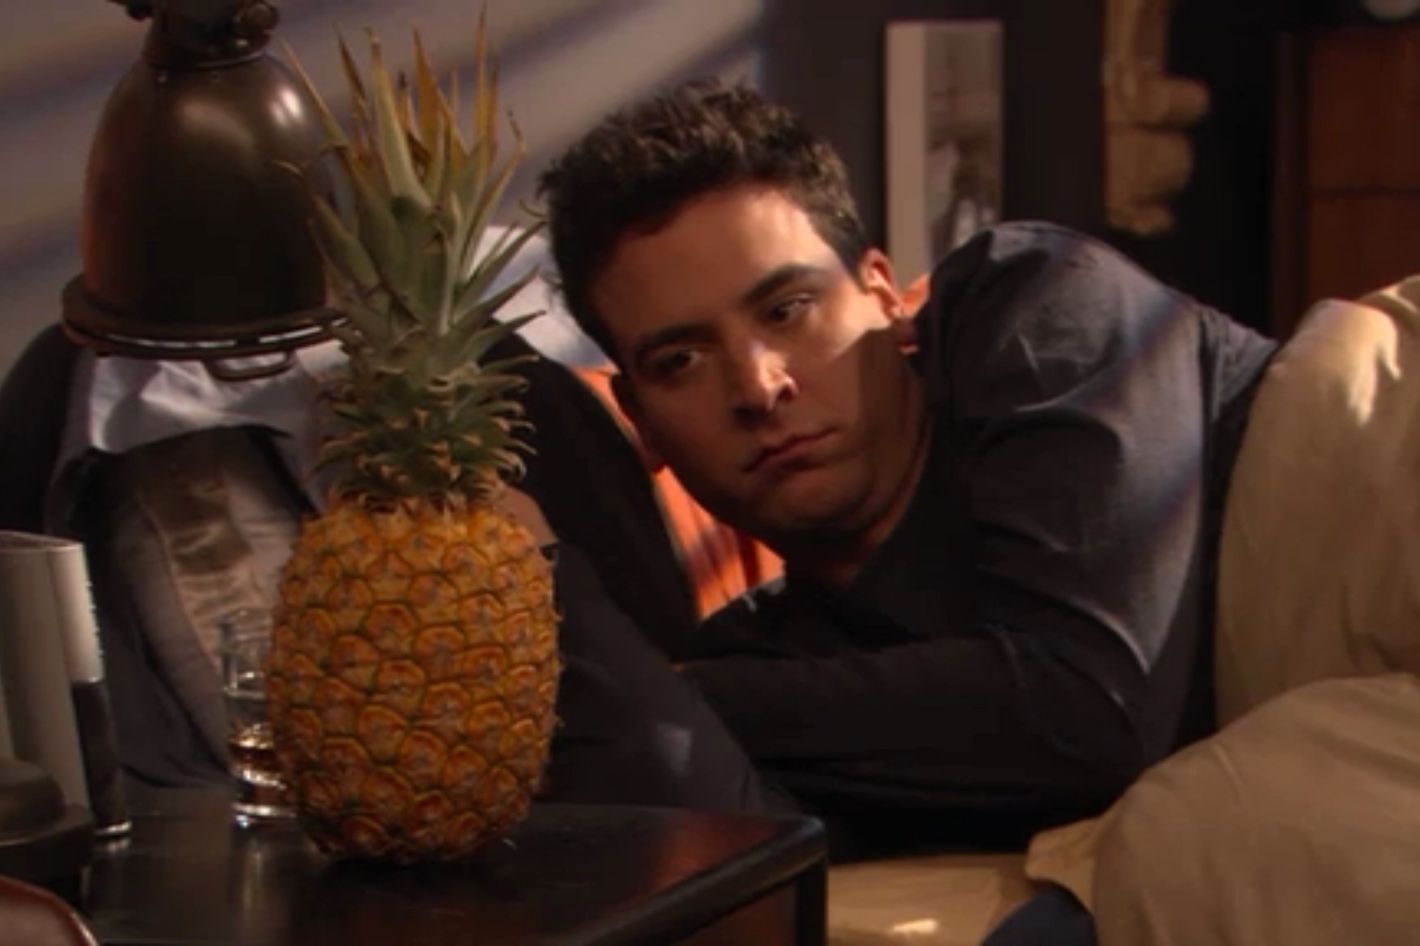 The Pineapple Incident